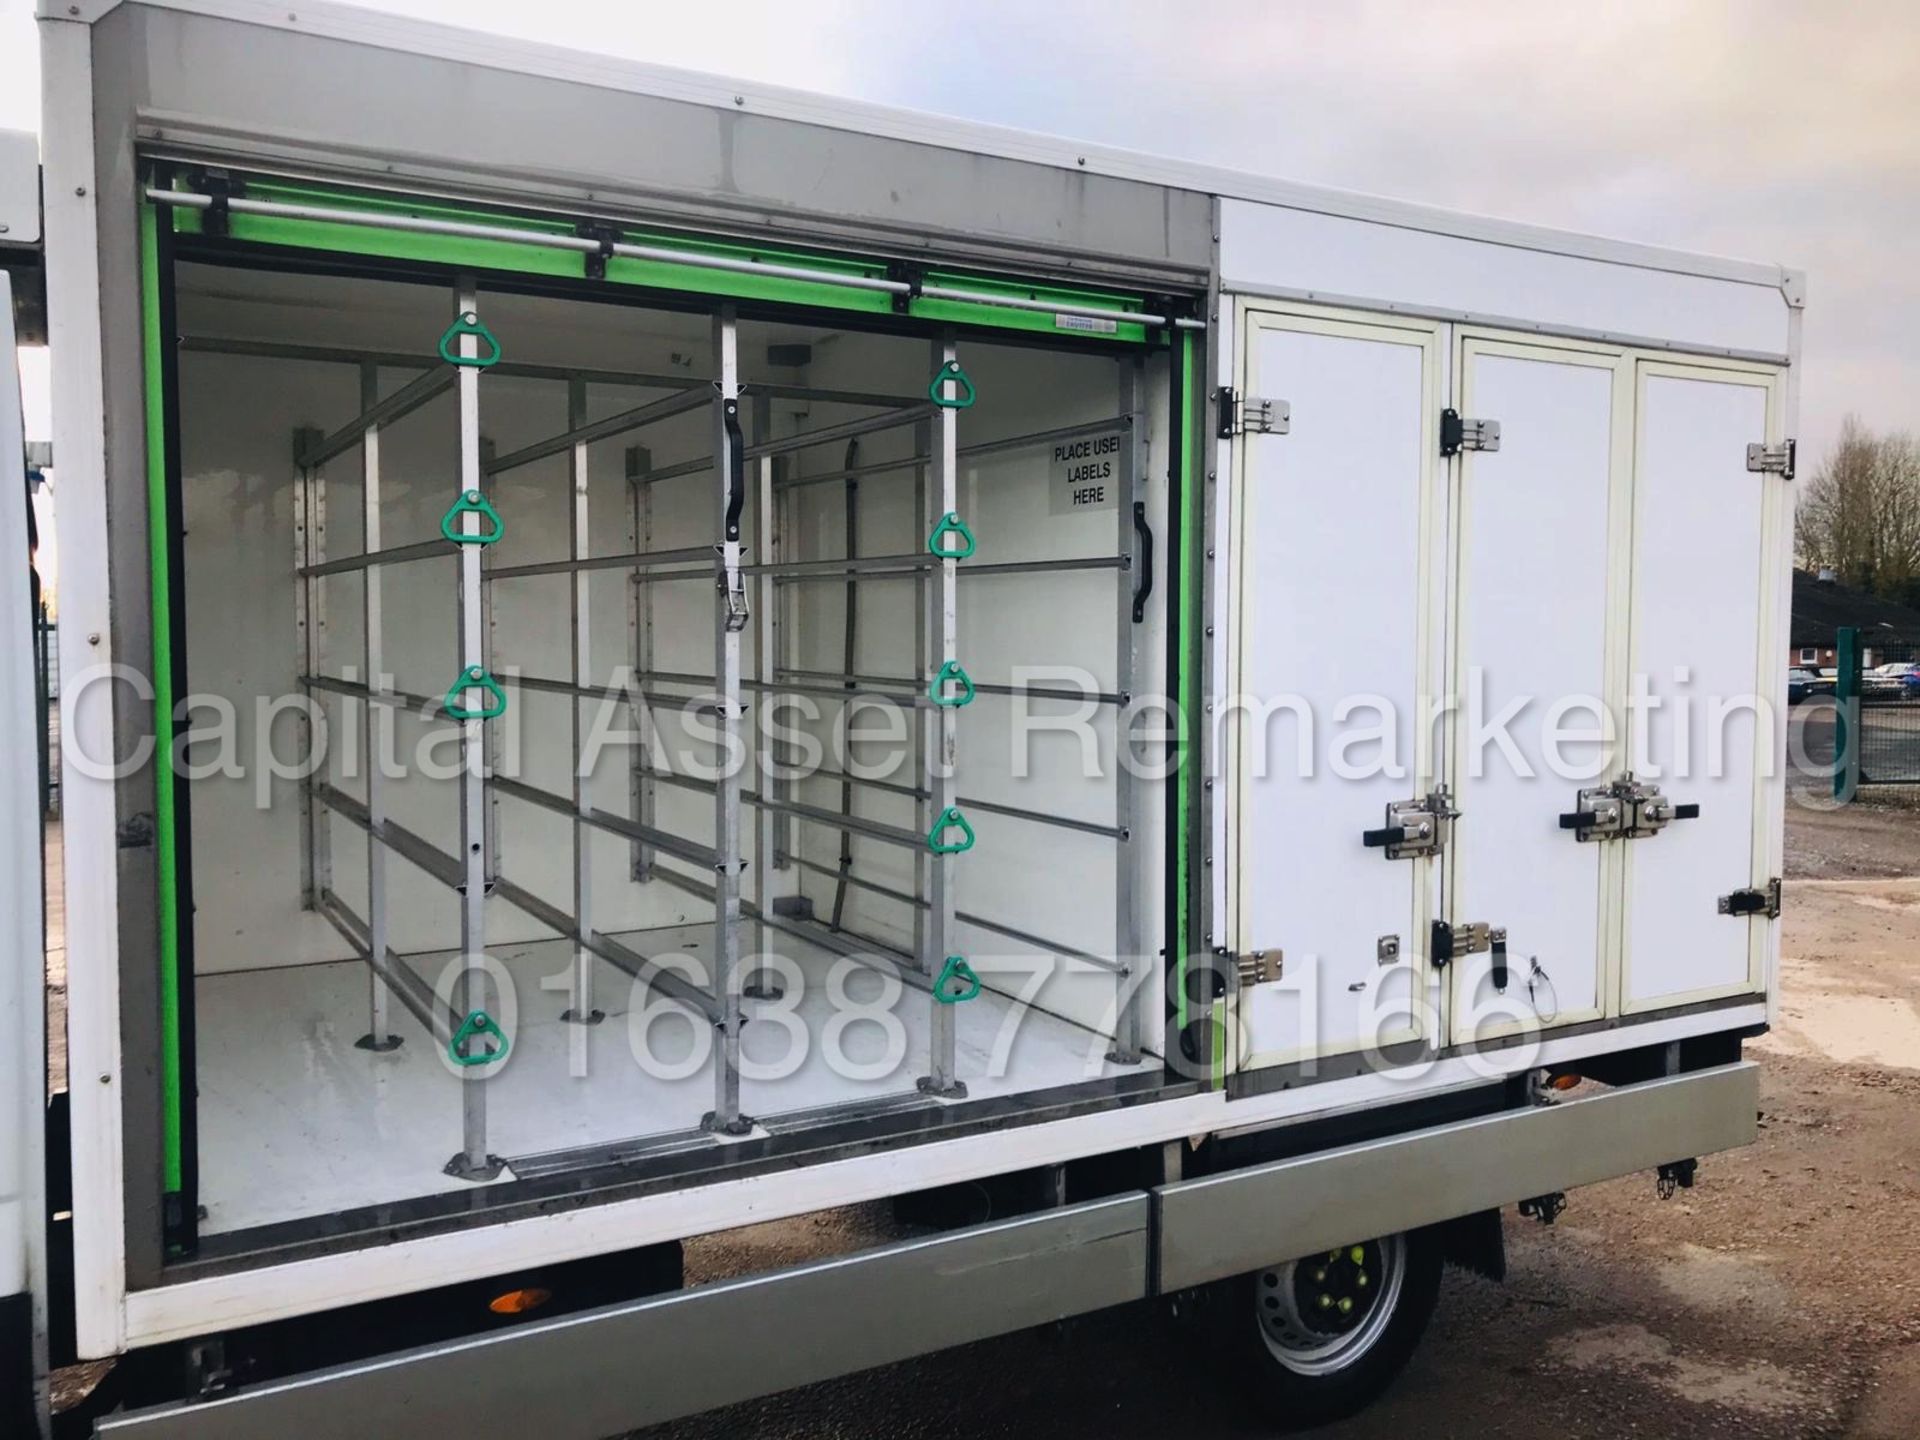 IVECO DAILY 35S11 *LWB - REFRIGERATED BOX* (2015 - NEW MODEL) '2.3 DIESEL - 8 SPEED AUTO' - Image 22 of 37